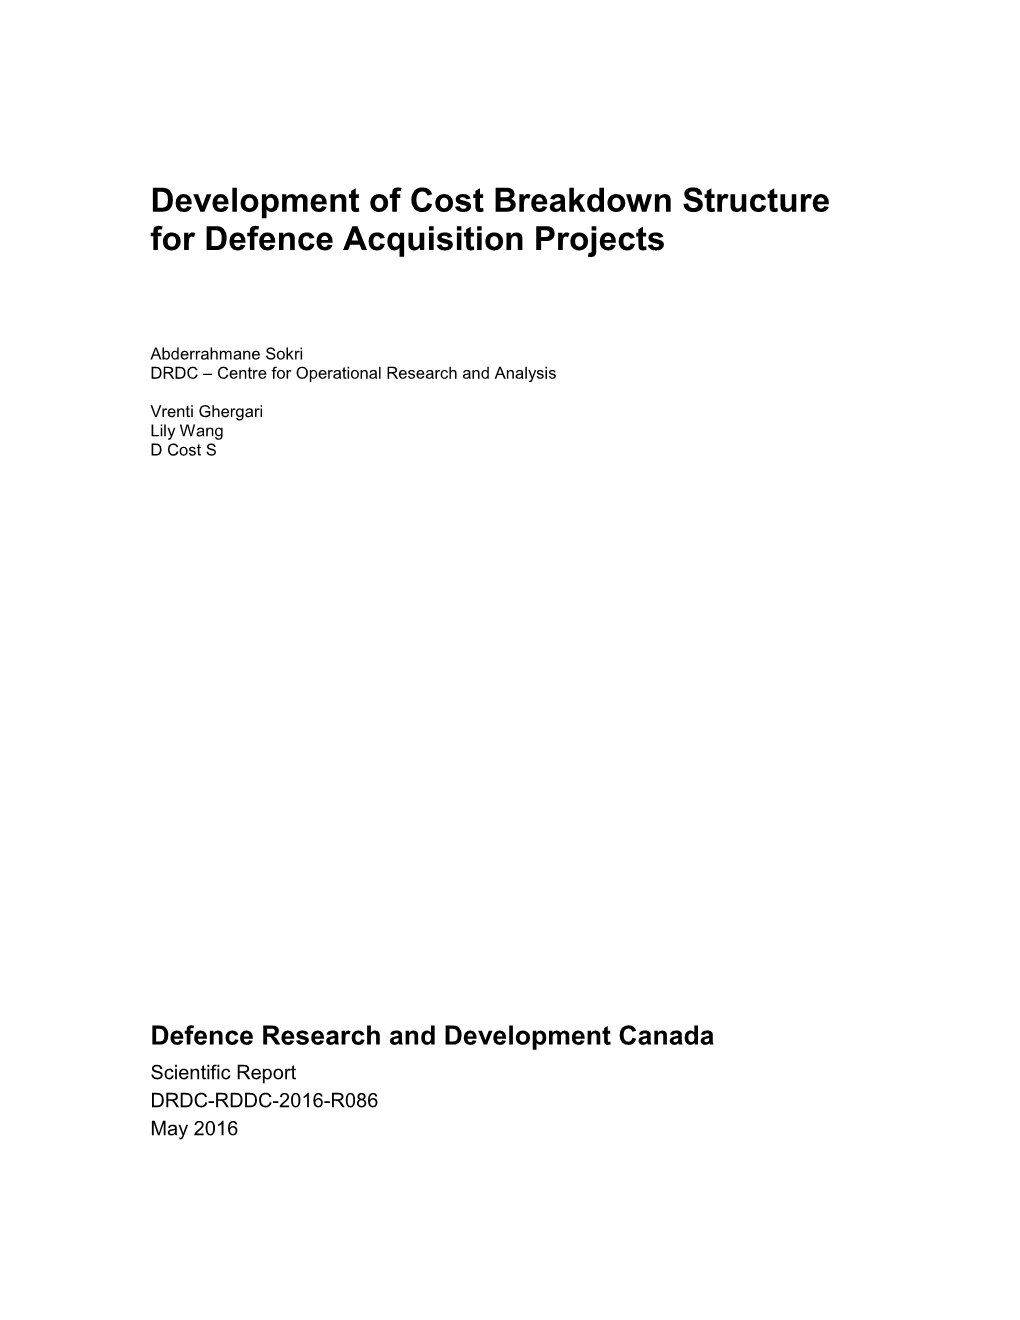 Development of Cost Breakdown Structure for Defence Acquisition Projects